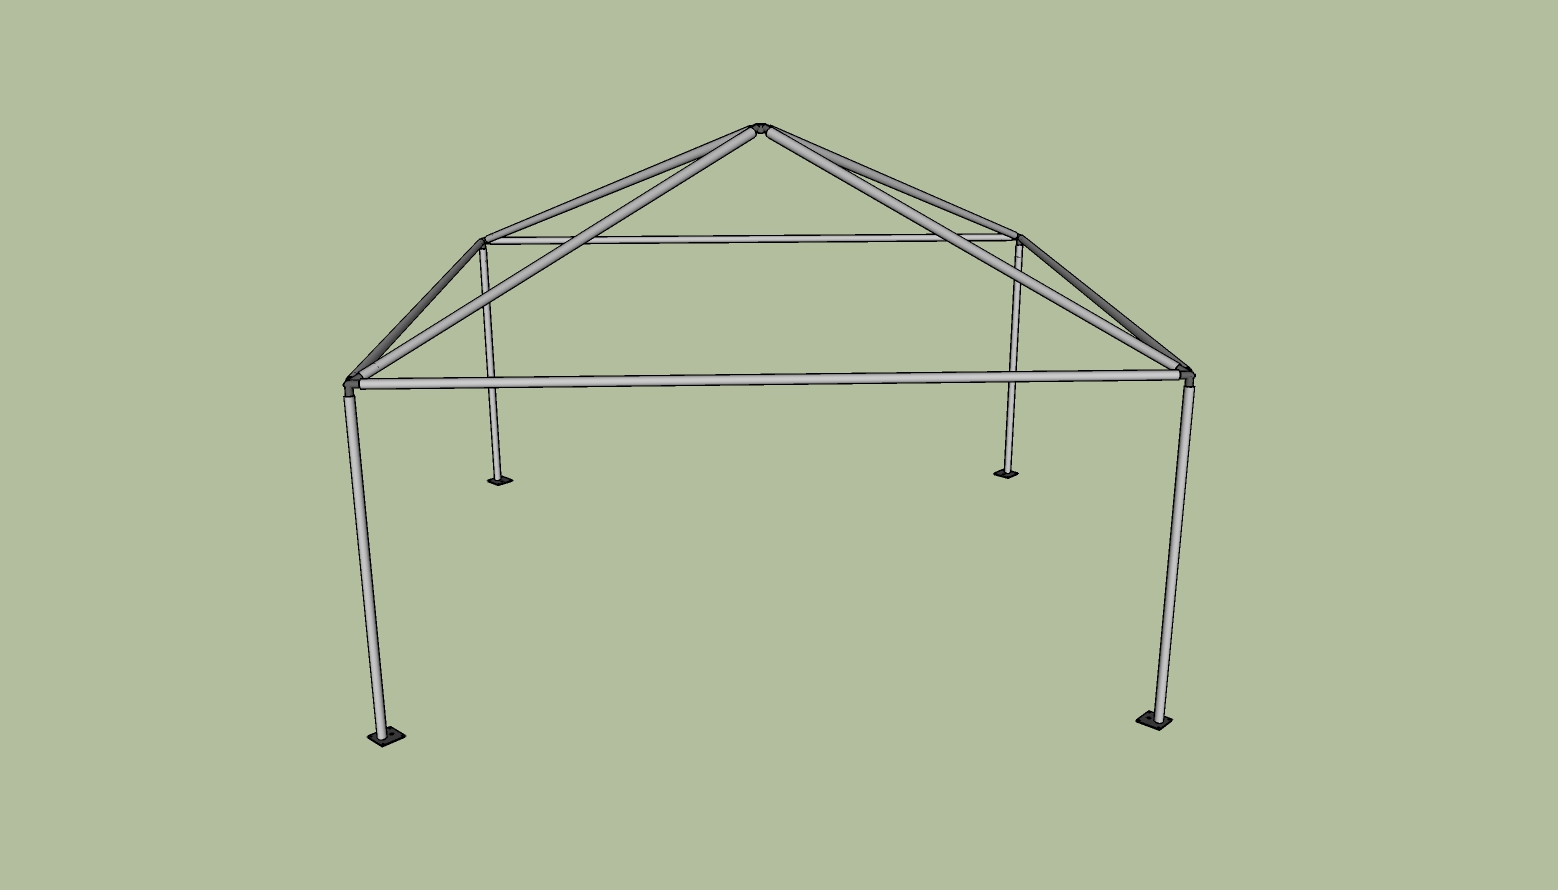 15x15 frame tent side view